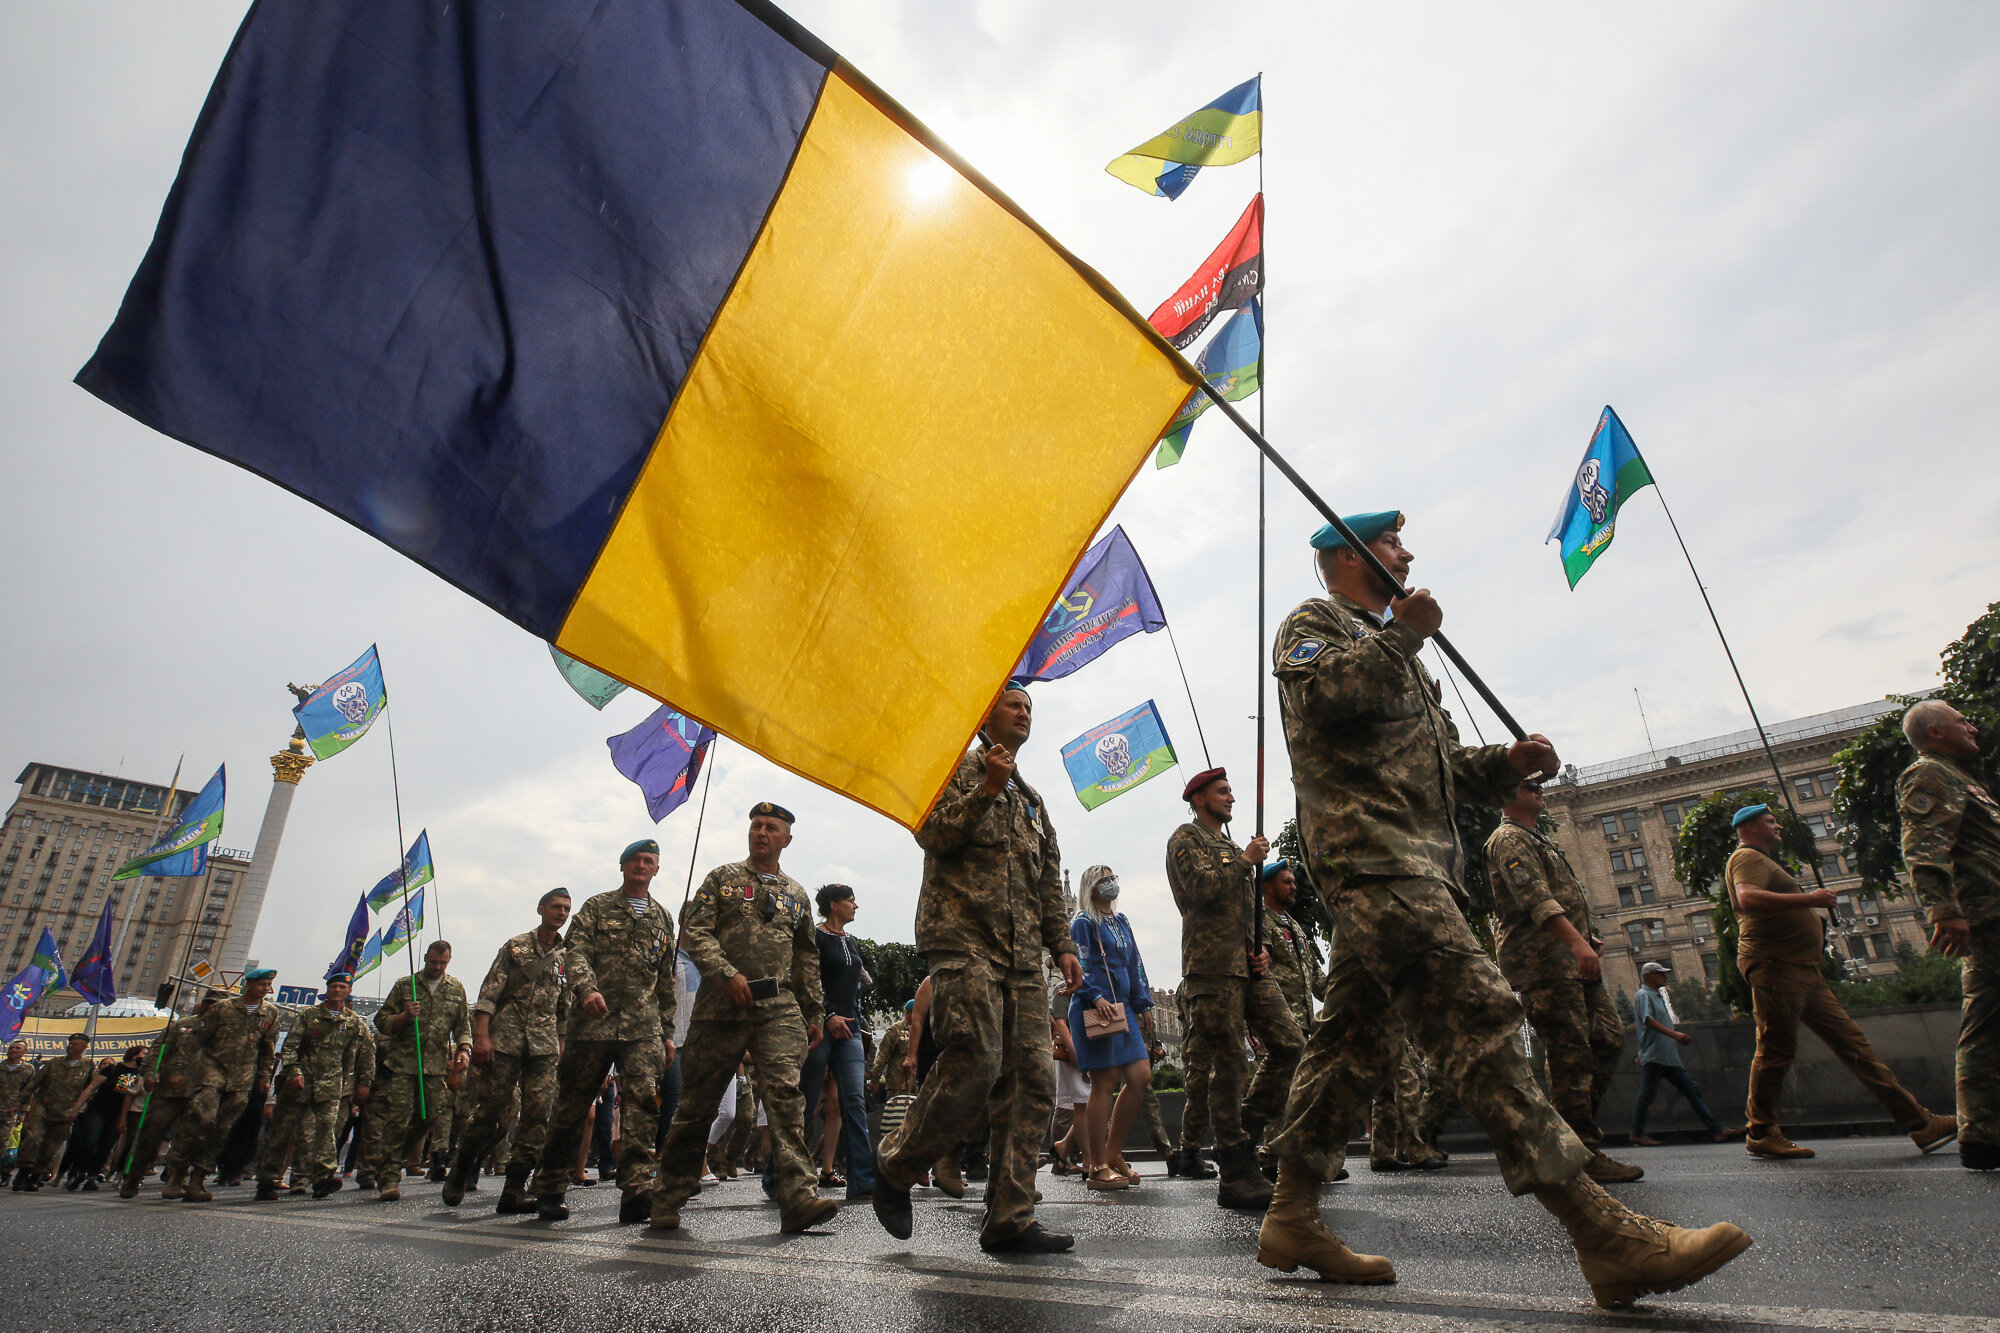 Ukrainian veterans and activists participate in the March of Defenders of Ukraine, an event that celebrated Ukraine&#8217;s Independence Day in Kyiv on August 24, 2020.